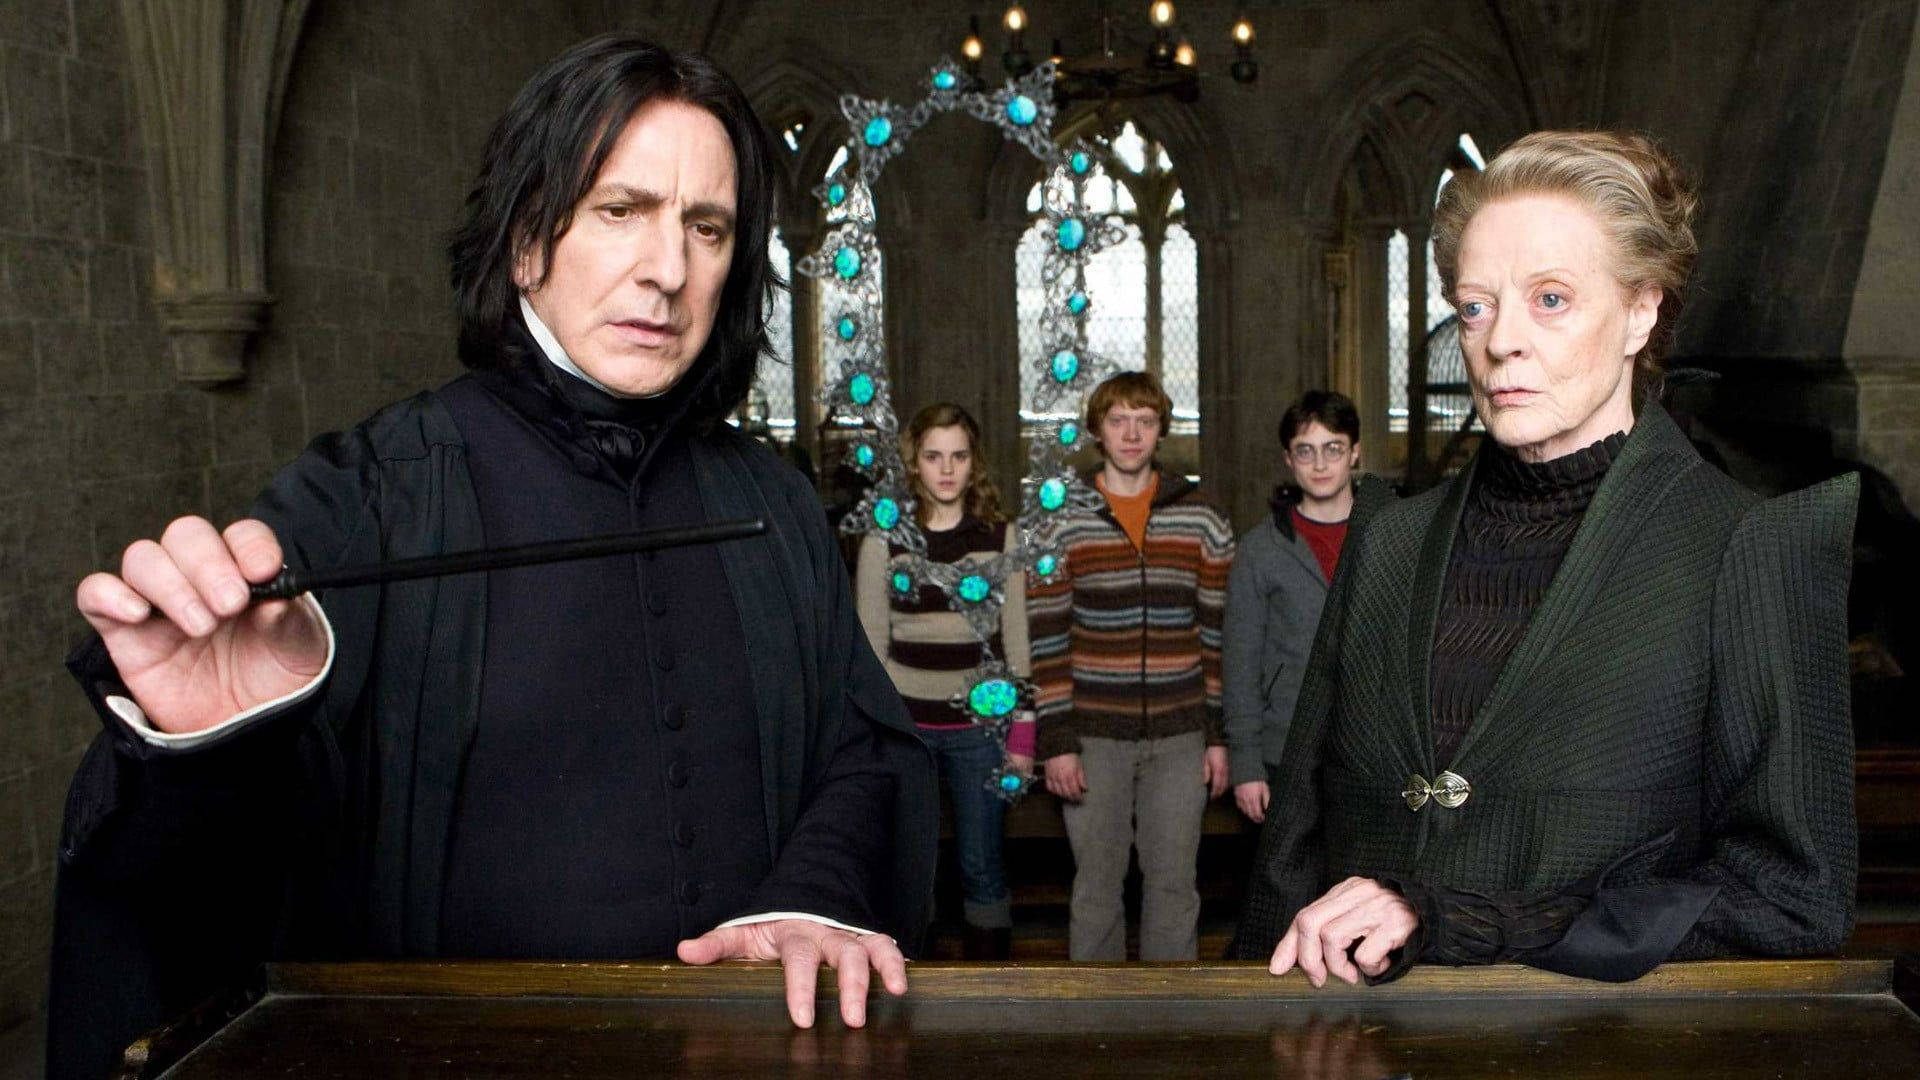 Ron Weasley, Professor Mcgonagall And Professor Snape Stand Together At Hogwarts. Background